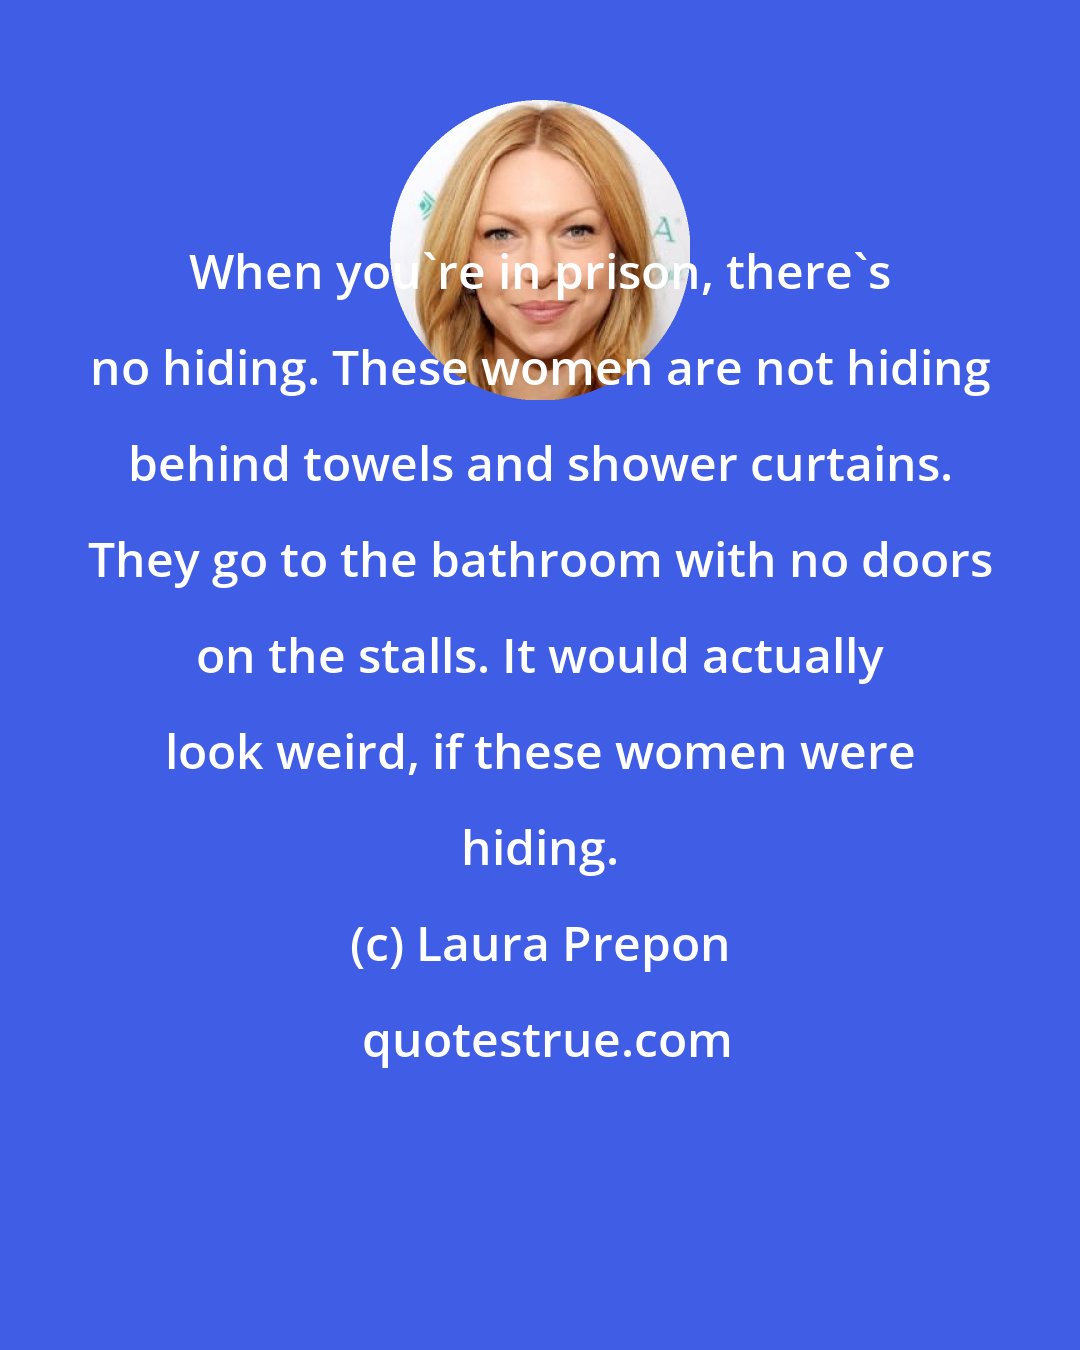 Laura Prepon: When you're in prison, there's no hiding. These women are not hiding behind towels and shower curtains. They go to the bathroom with no doors on the stalls. It would actually look weird, if these women were hiding.